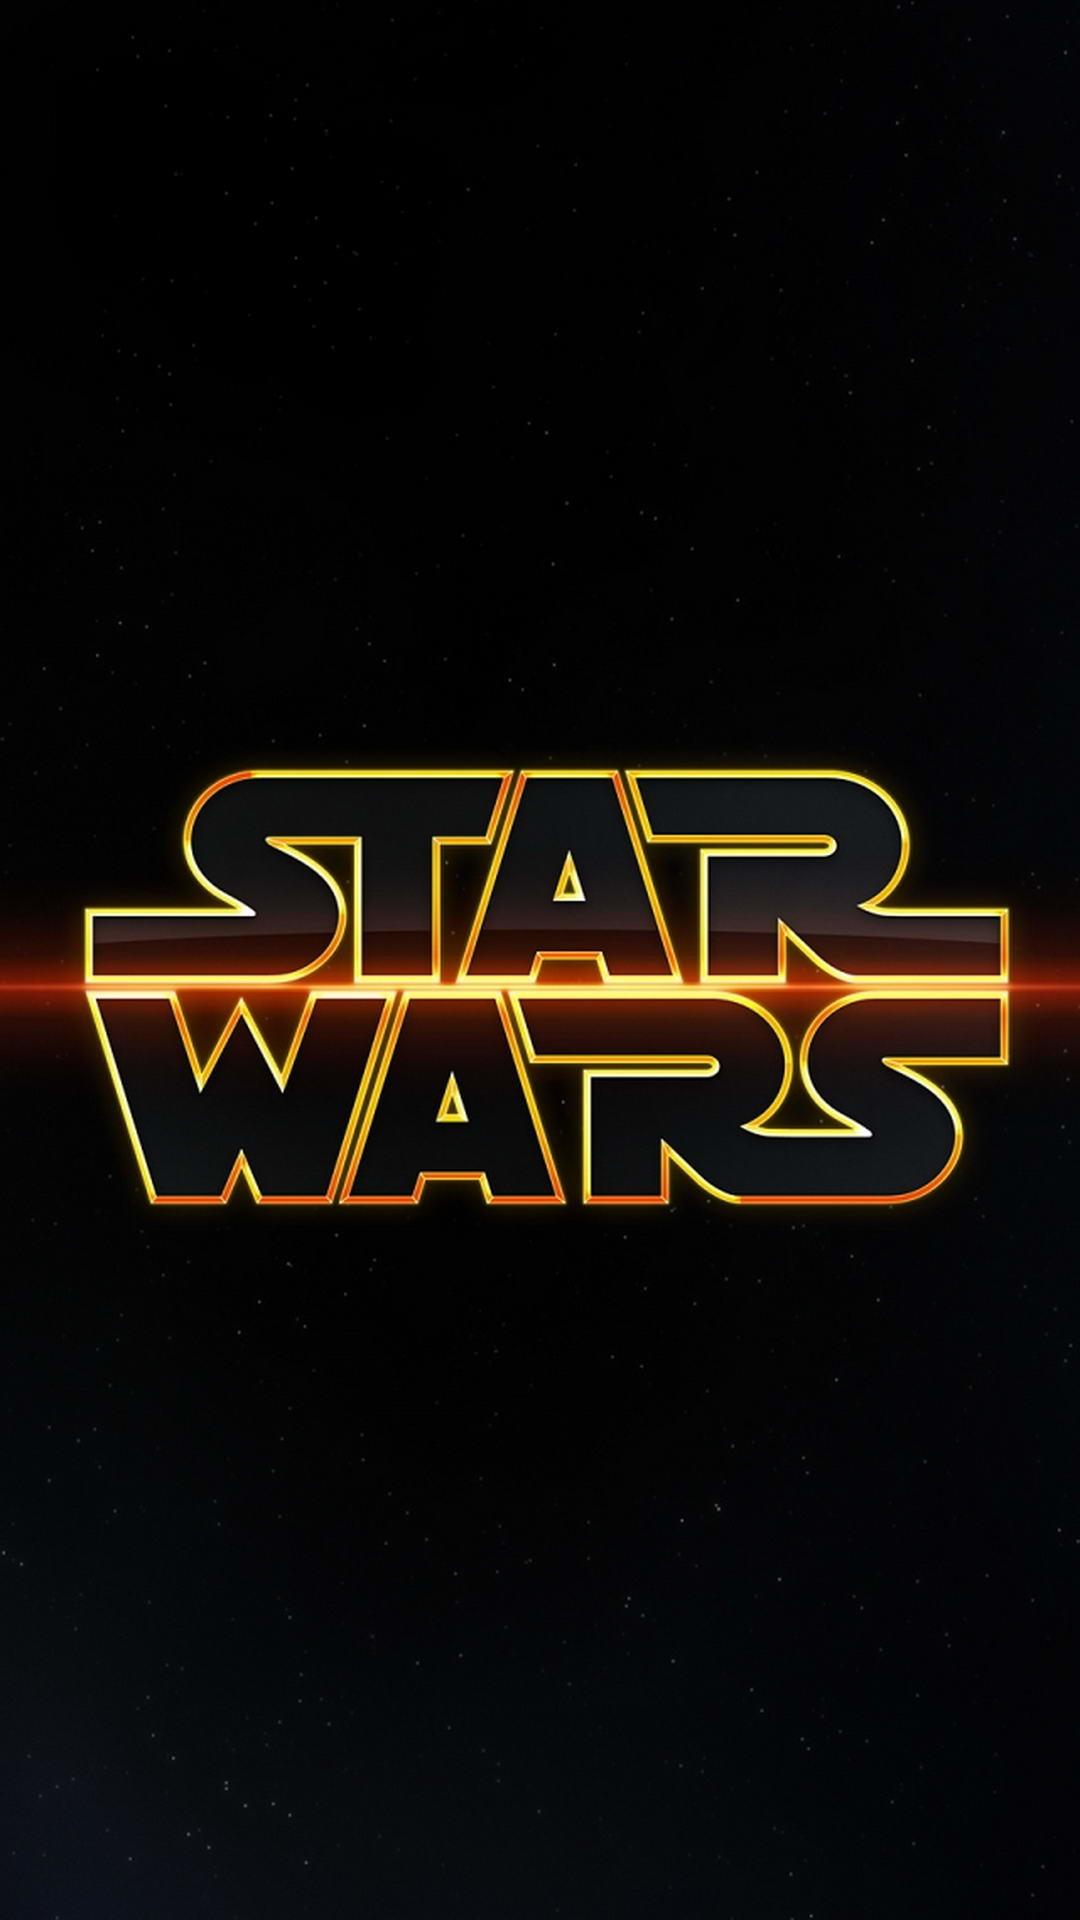 Star Wars Wallpaper for Android